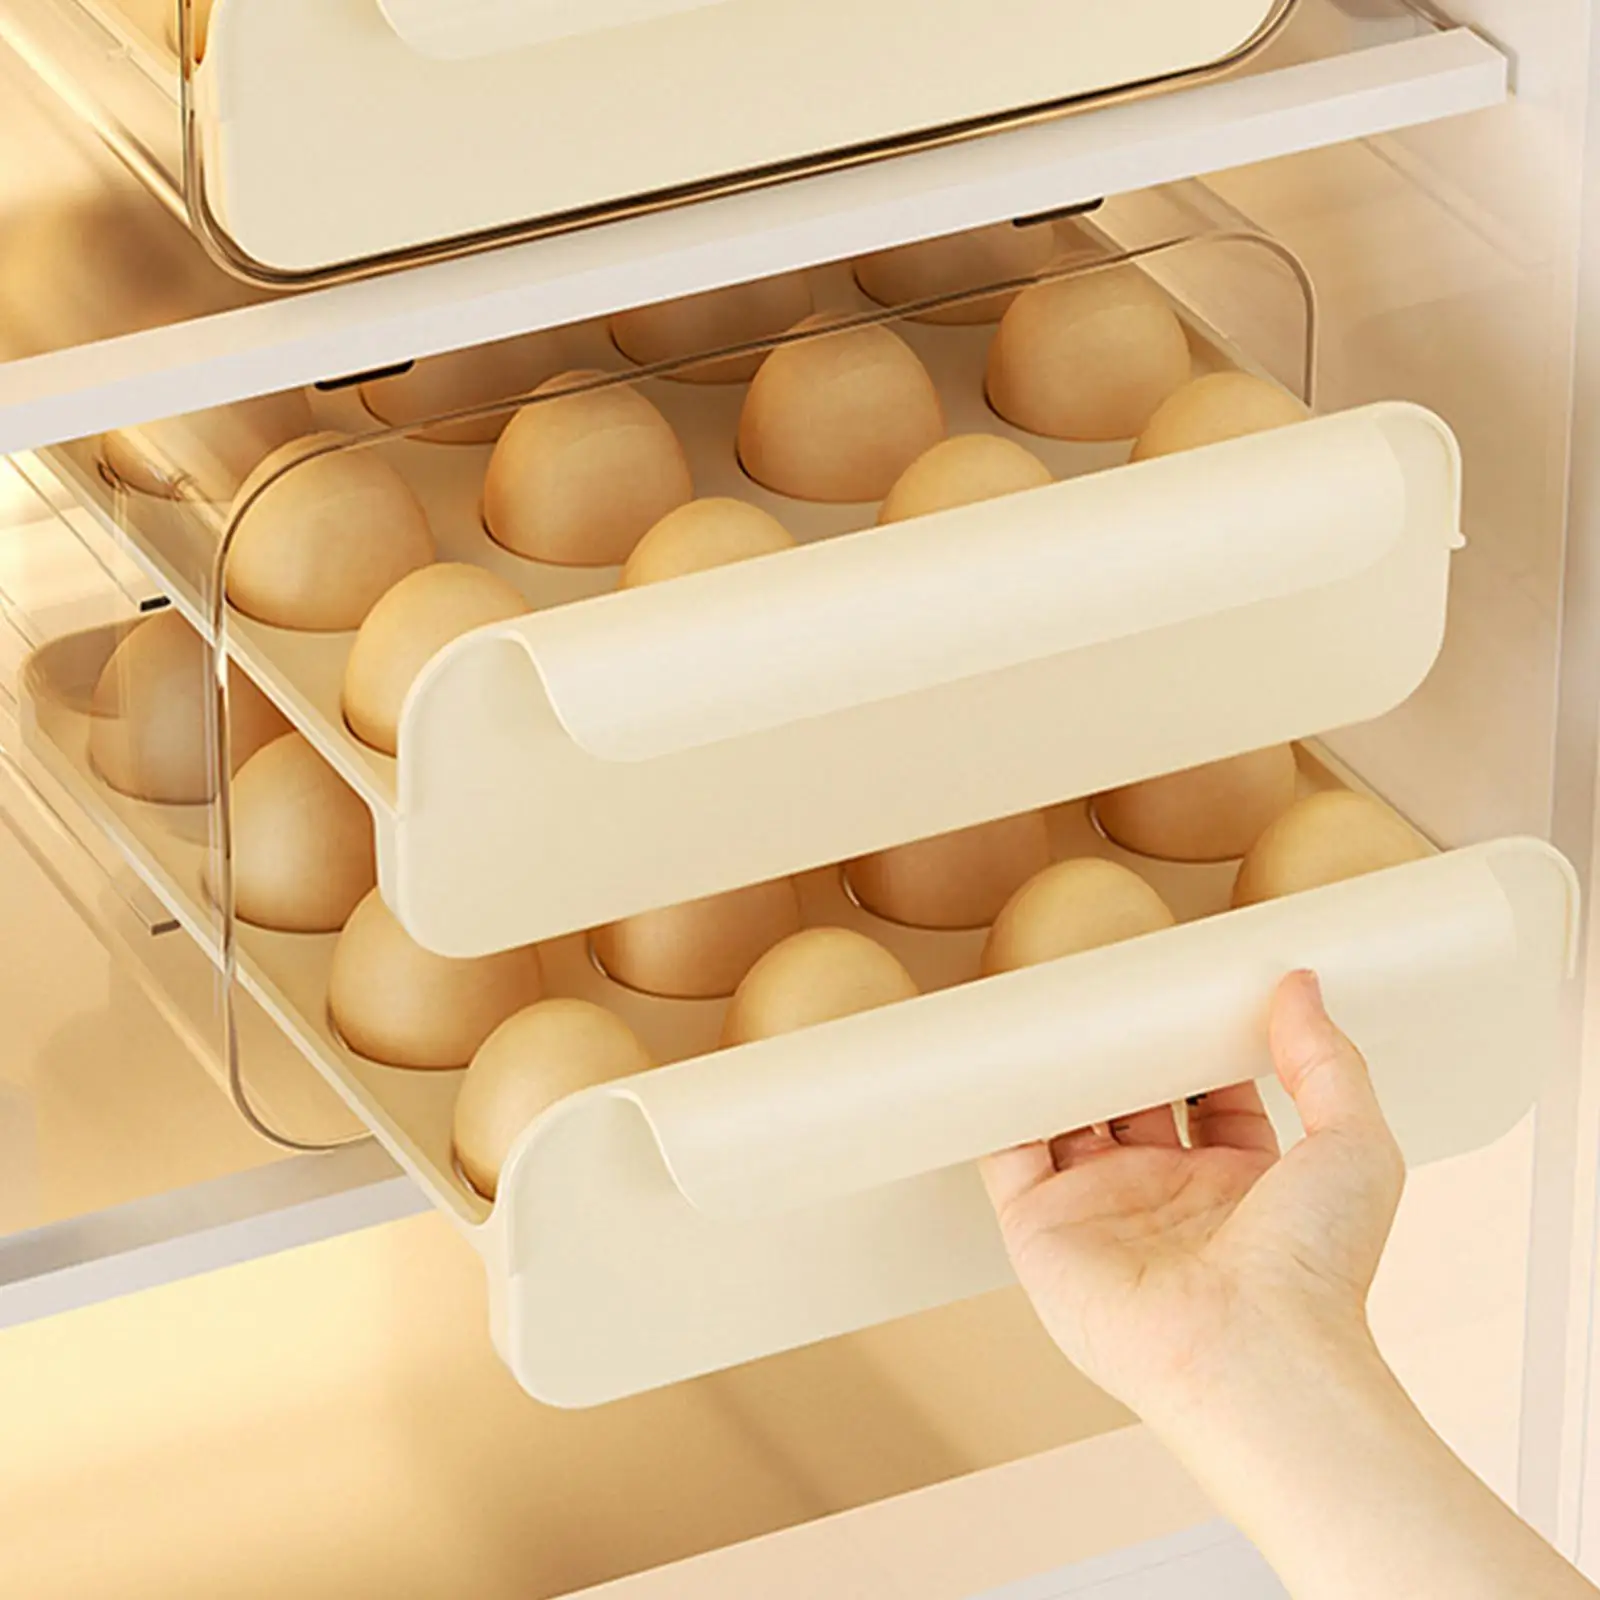 Eggs Storage Tray Pull Out Stackable 32 Egg Trays Eggs Container Egg Holder for Countertop Pantry Cupboard Refrigerator Kitchen